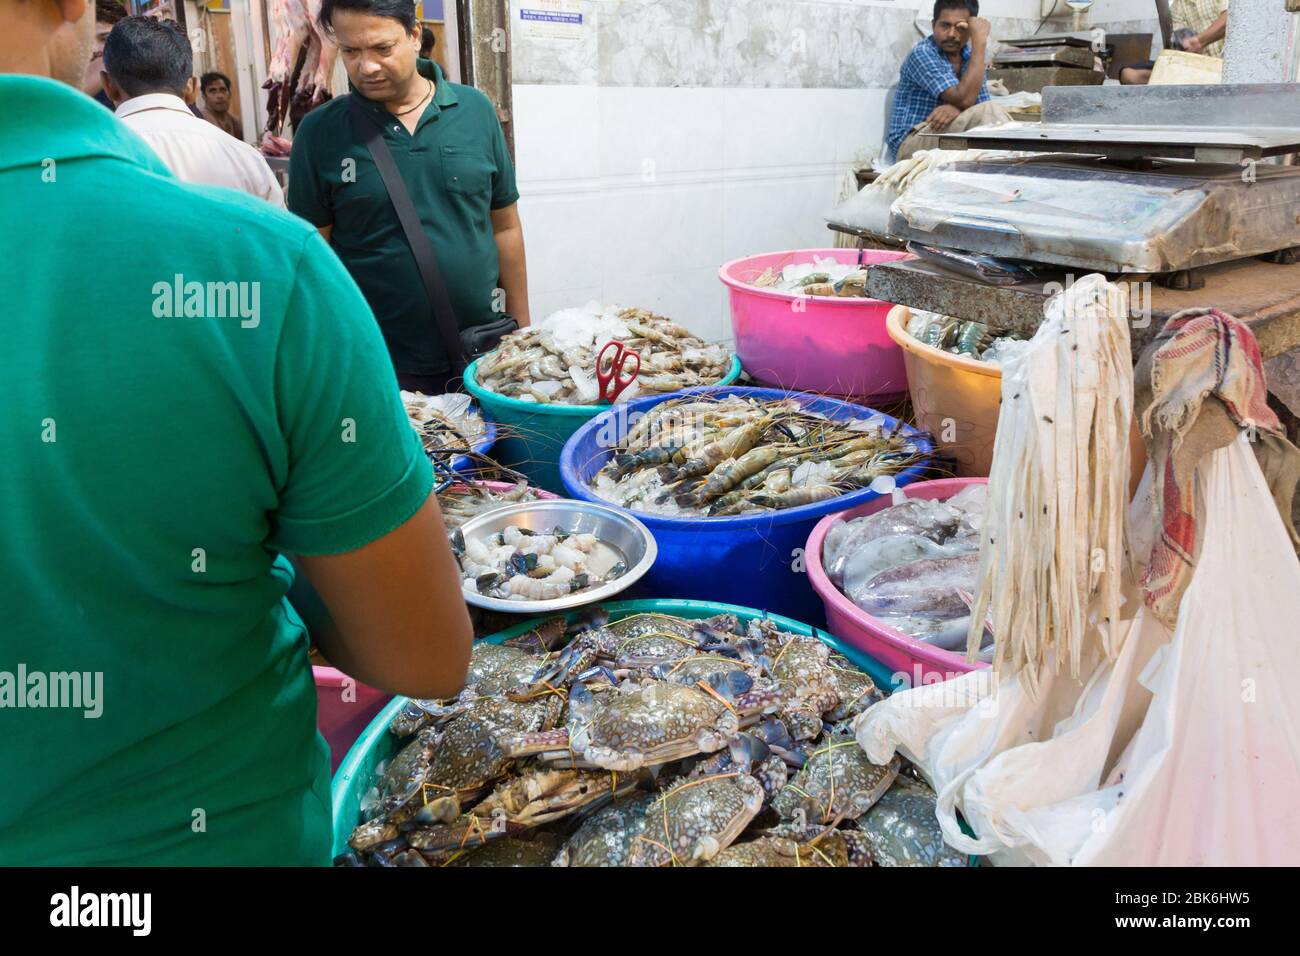 New Delhi, India - August 5, 2018: Seafood on sale at INA Market in New Delhi Stock Photo